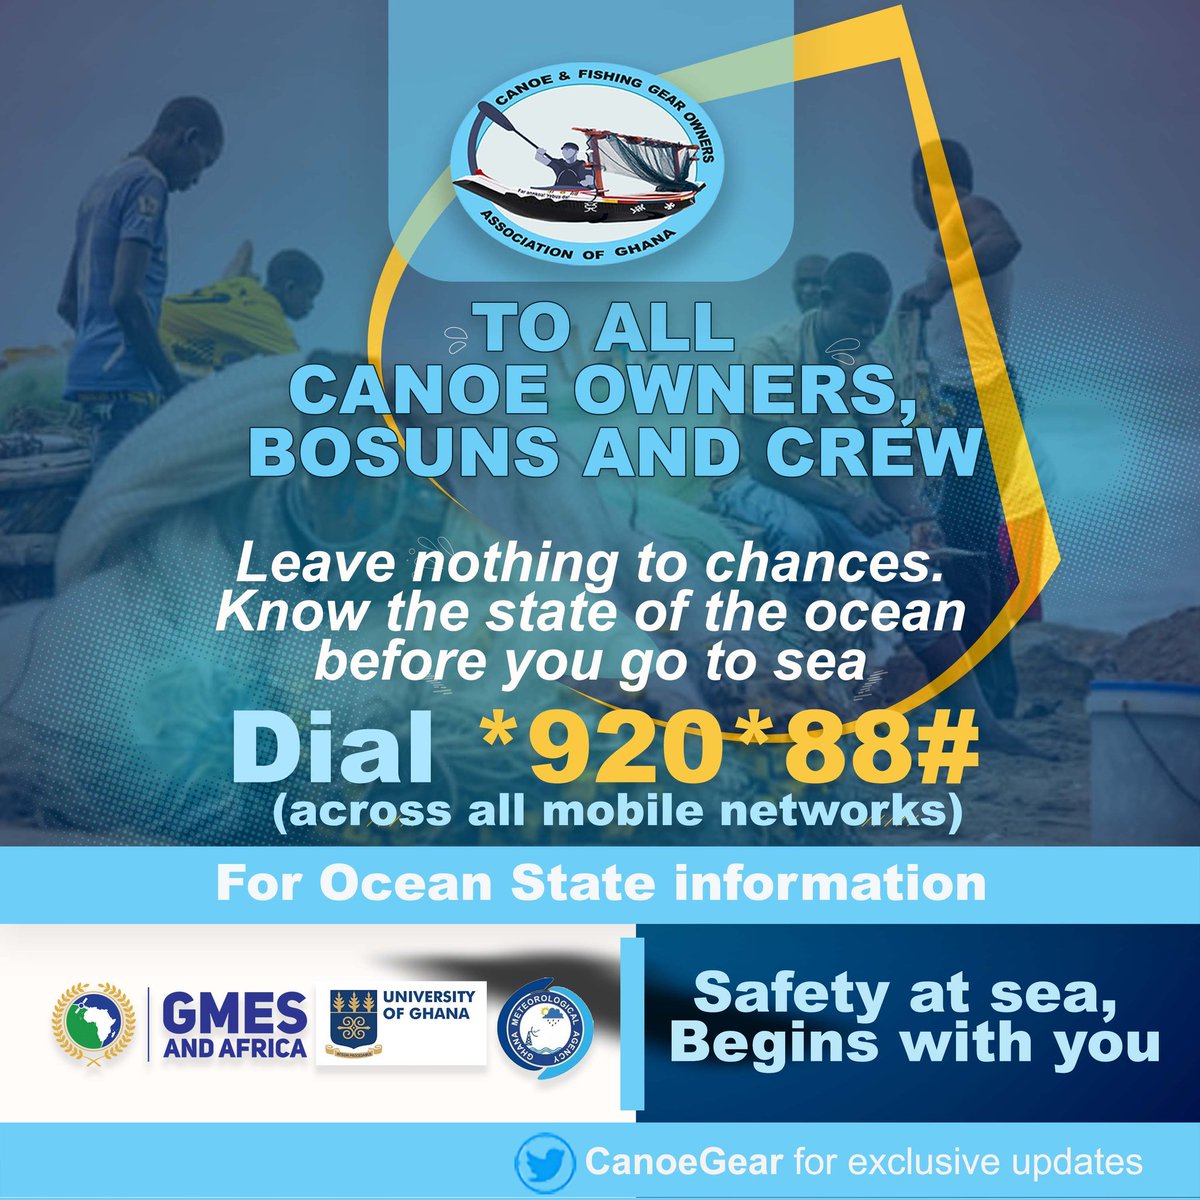 @capecffa @fish_safety @ilo @AfriqueCaopa @FAOfish @SSF_Nicole @ICSF1 @EU_MARE @LDAC_eu @PewEurope In #Ghana @CanoeGear has been concerned about lives and investments of #ssf that are lost at sea due to #climate change and bad weather,and has been engaging fishers on #SafetyAtSea, with support from @ug_gmes and @GhanaMet

@ICSF1 @GMESAfrica @nafcoast @BROT_furdiewelt @ccm_ucc